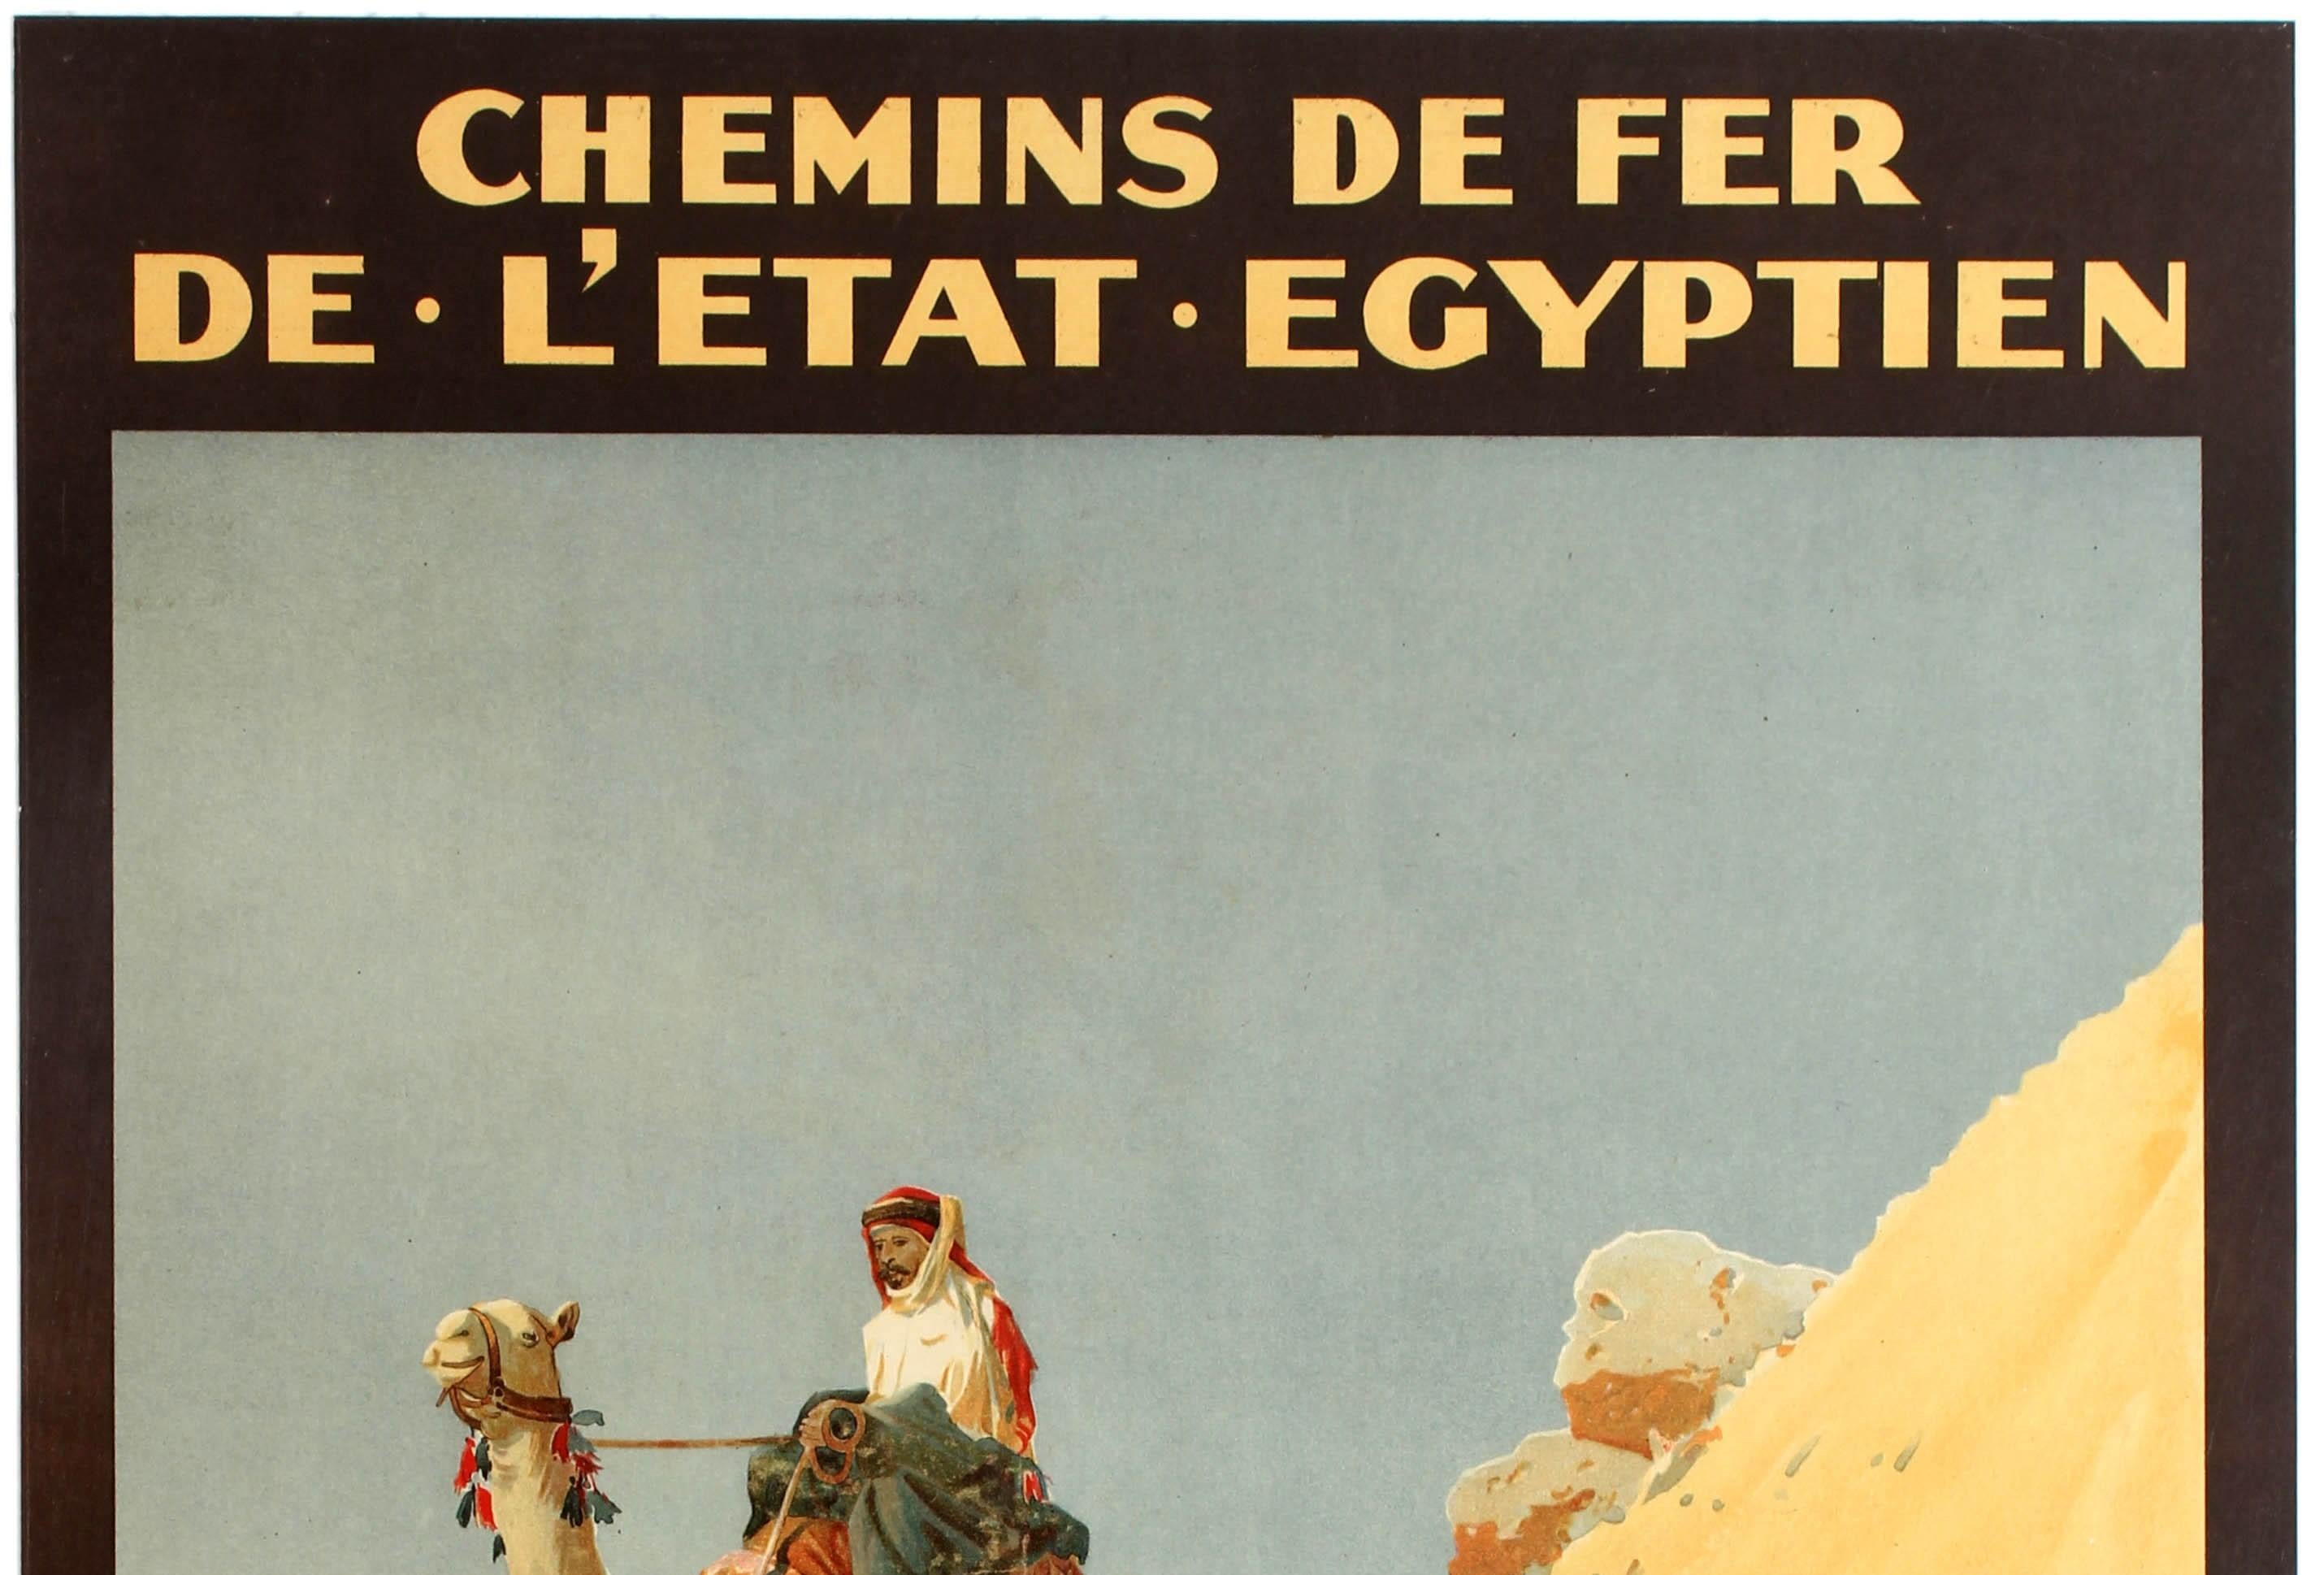 Original antique travel poster advertising the Railway of the Egyptian State featuring a great image by Augustus Osborne Lamplough (1877-1930) of a man riding a camel through the sand in the desert with the text in French above and below reading: